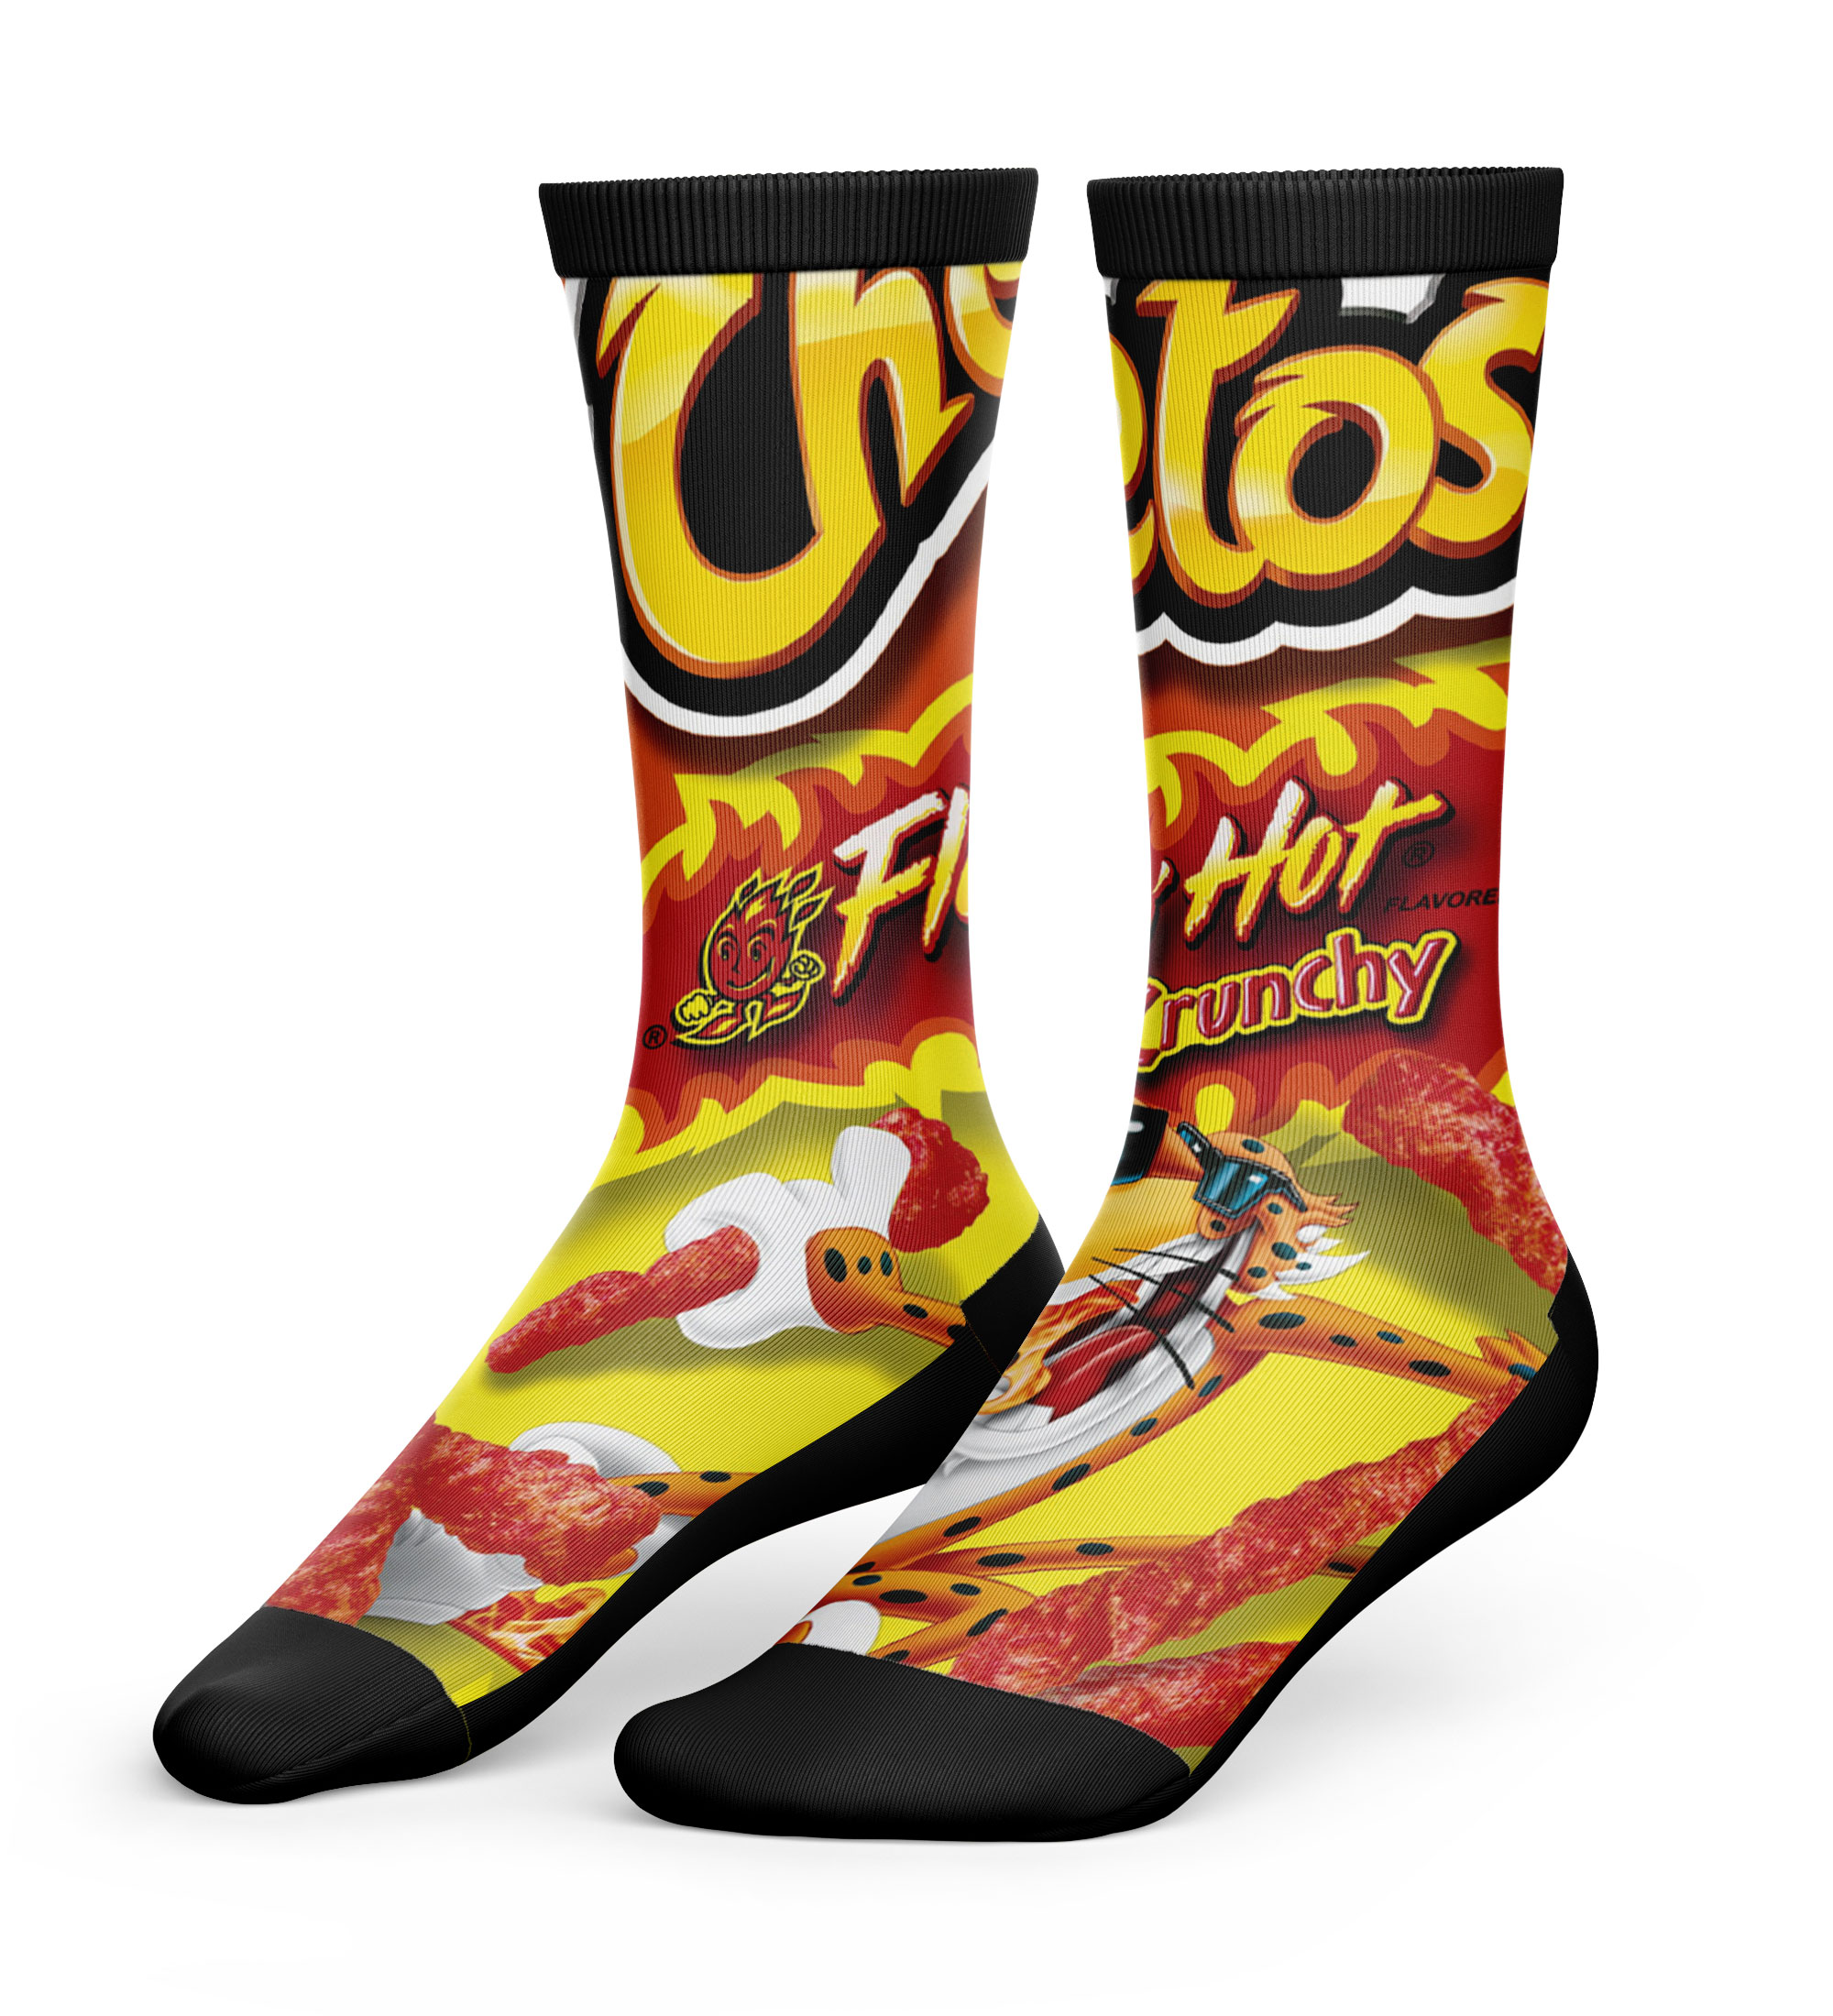 Wholesale Sublimated Socks in Texas